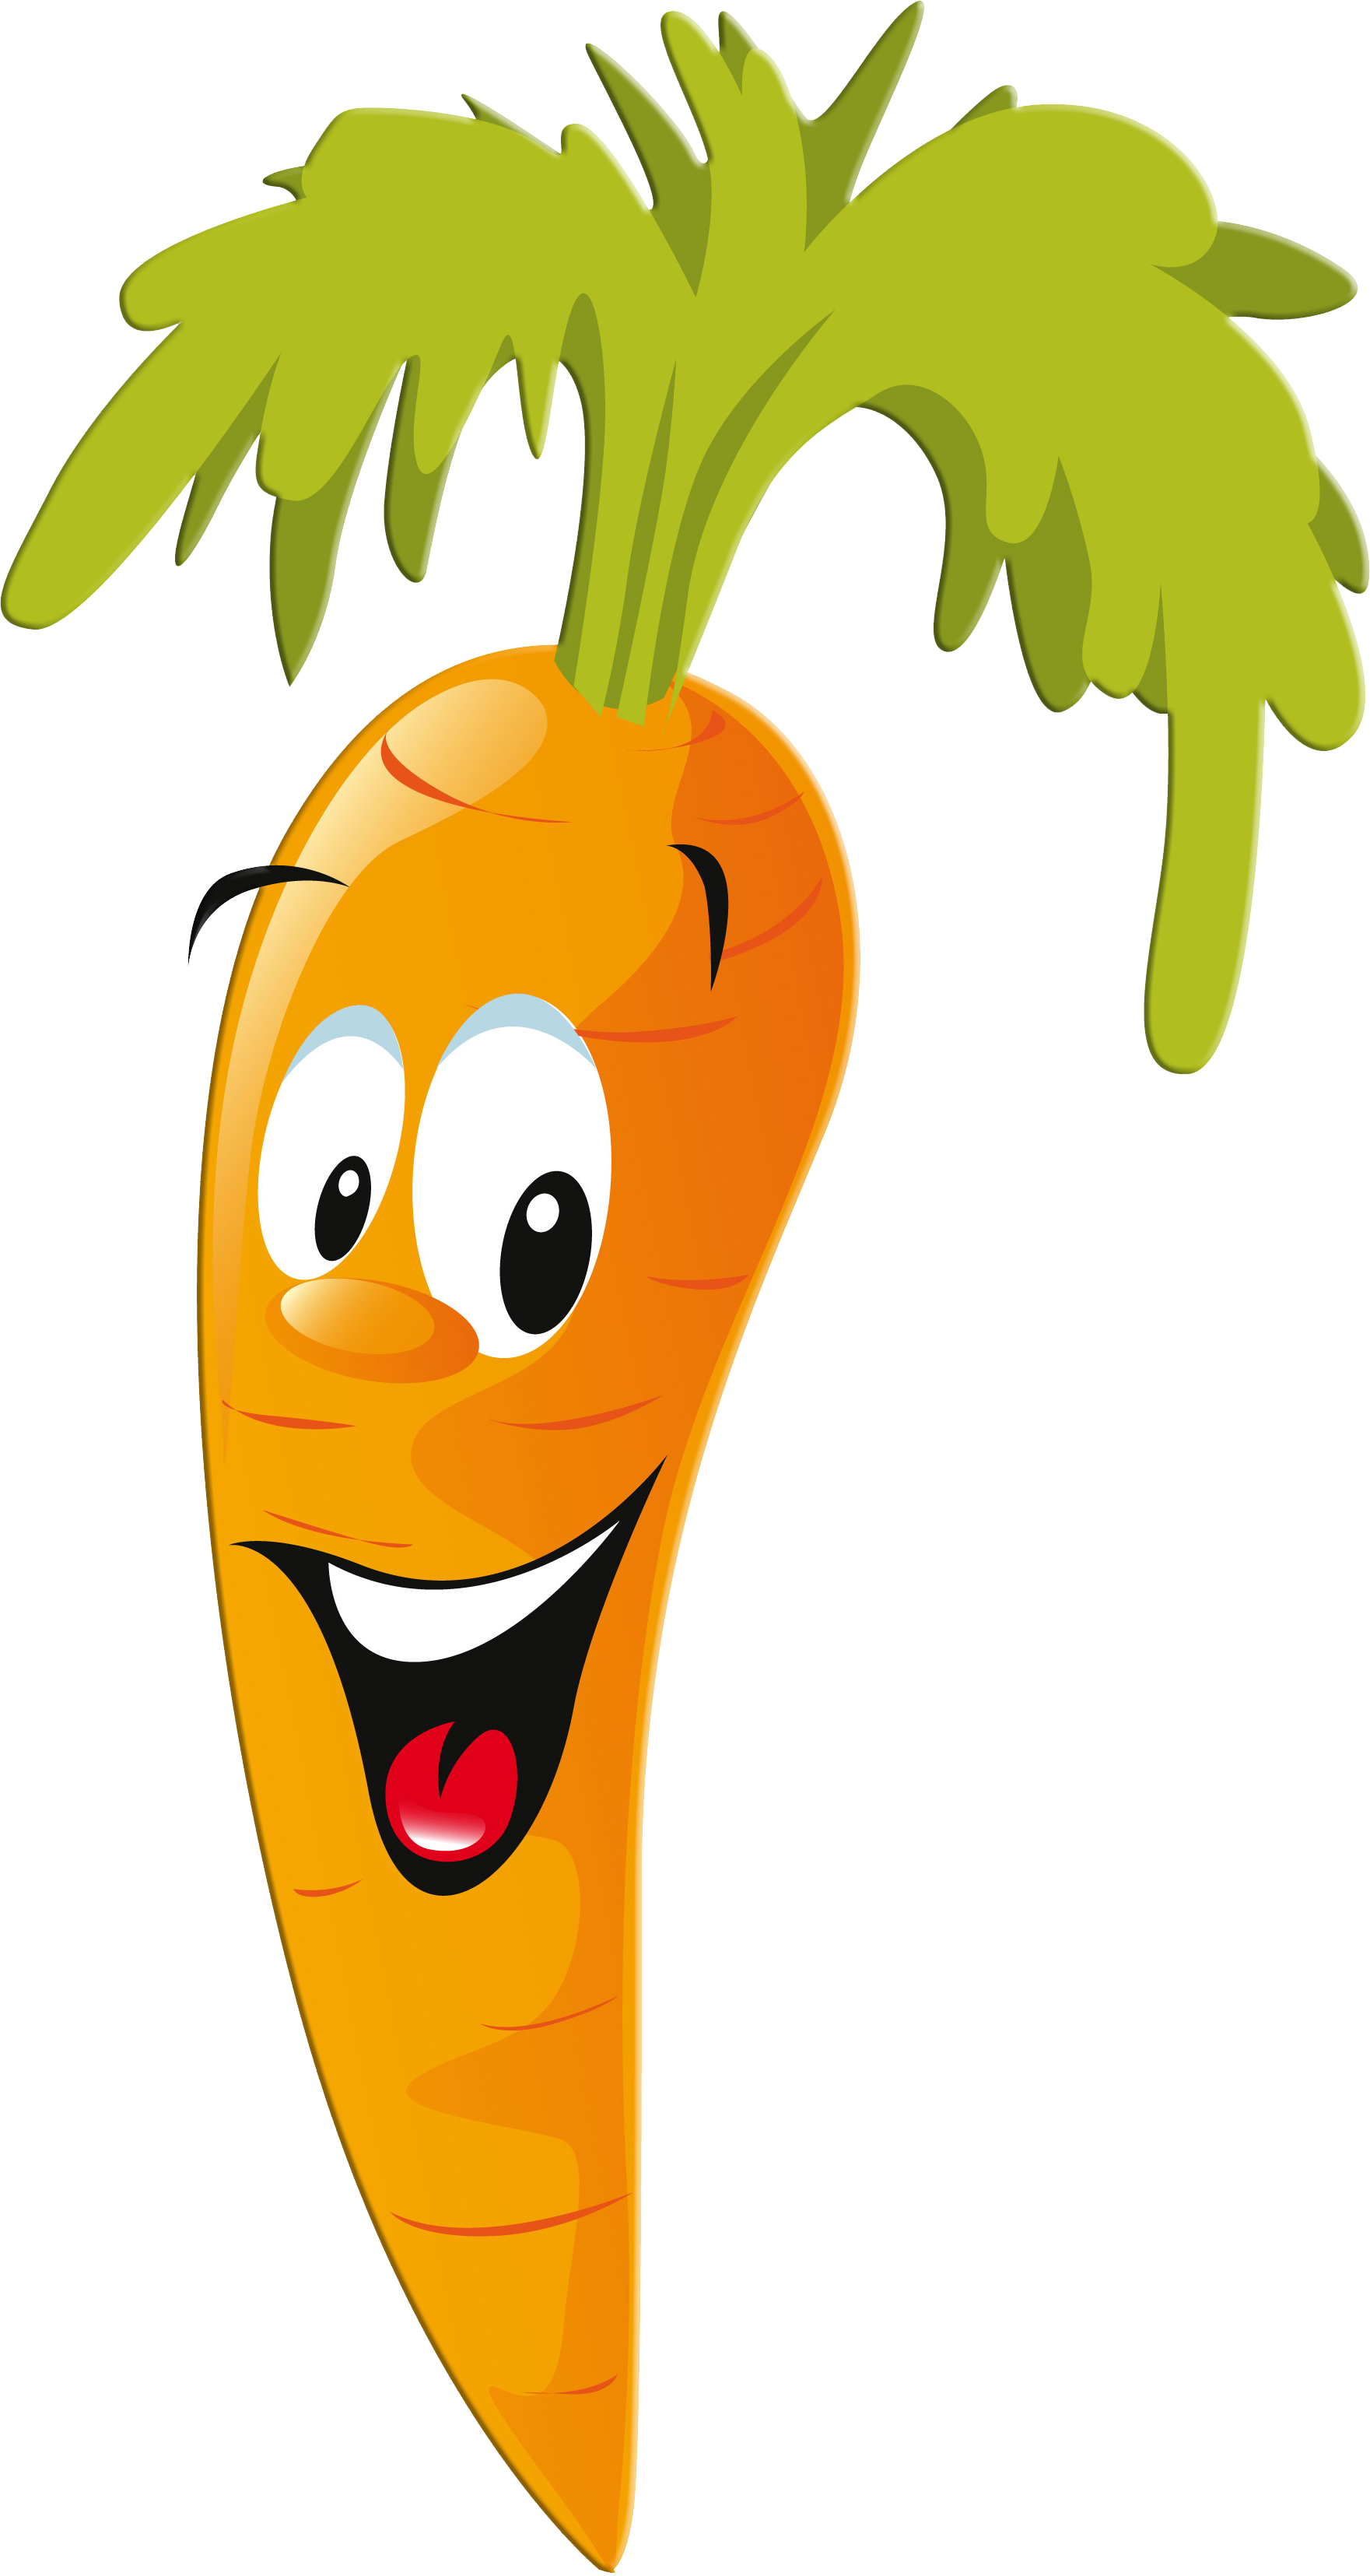 Pin by on art. Kid clipart vegetable